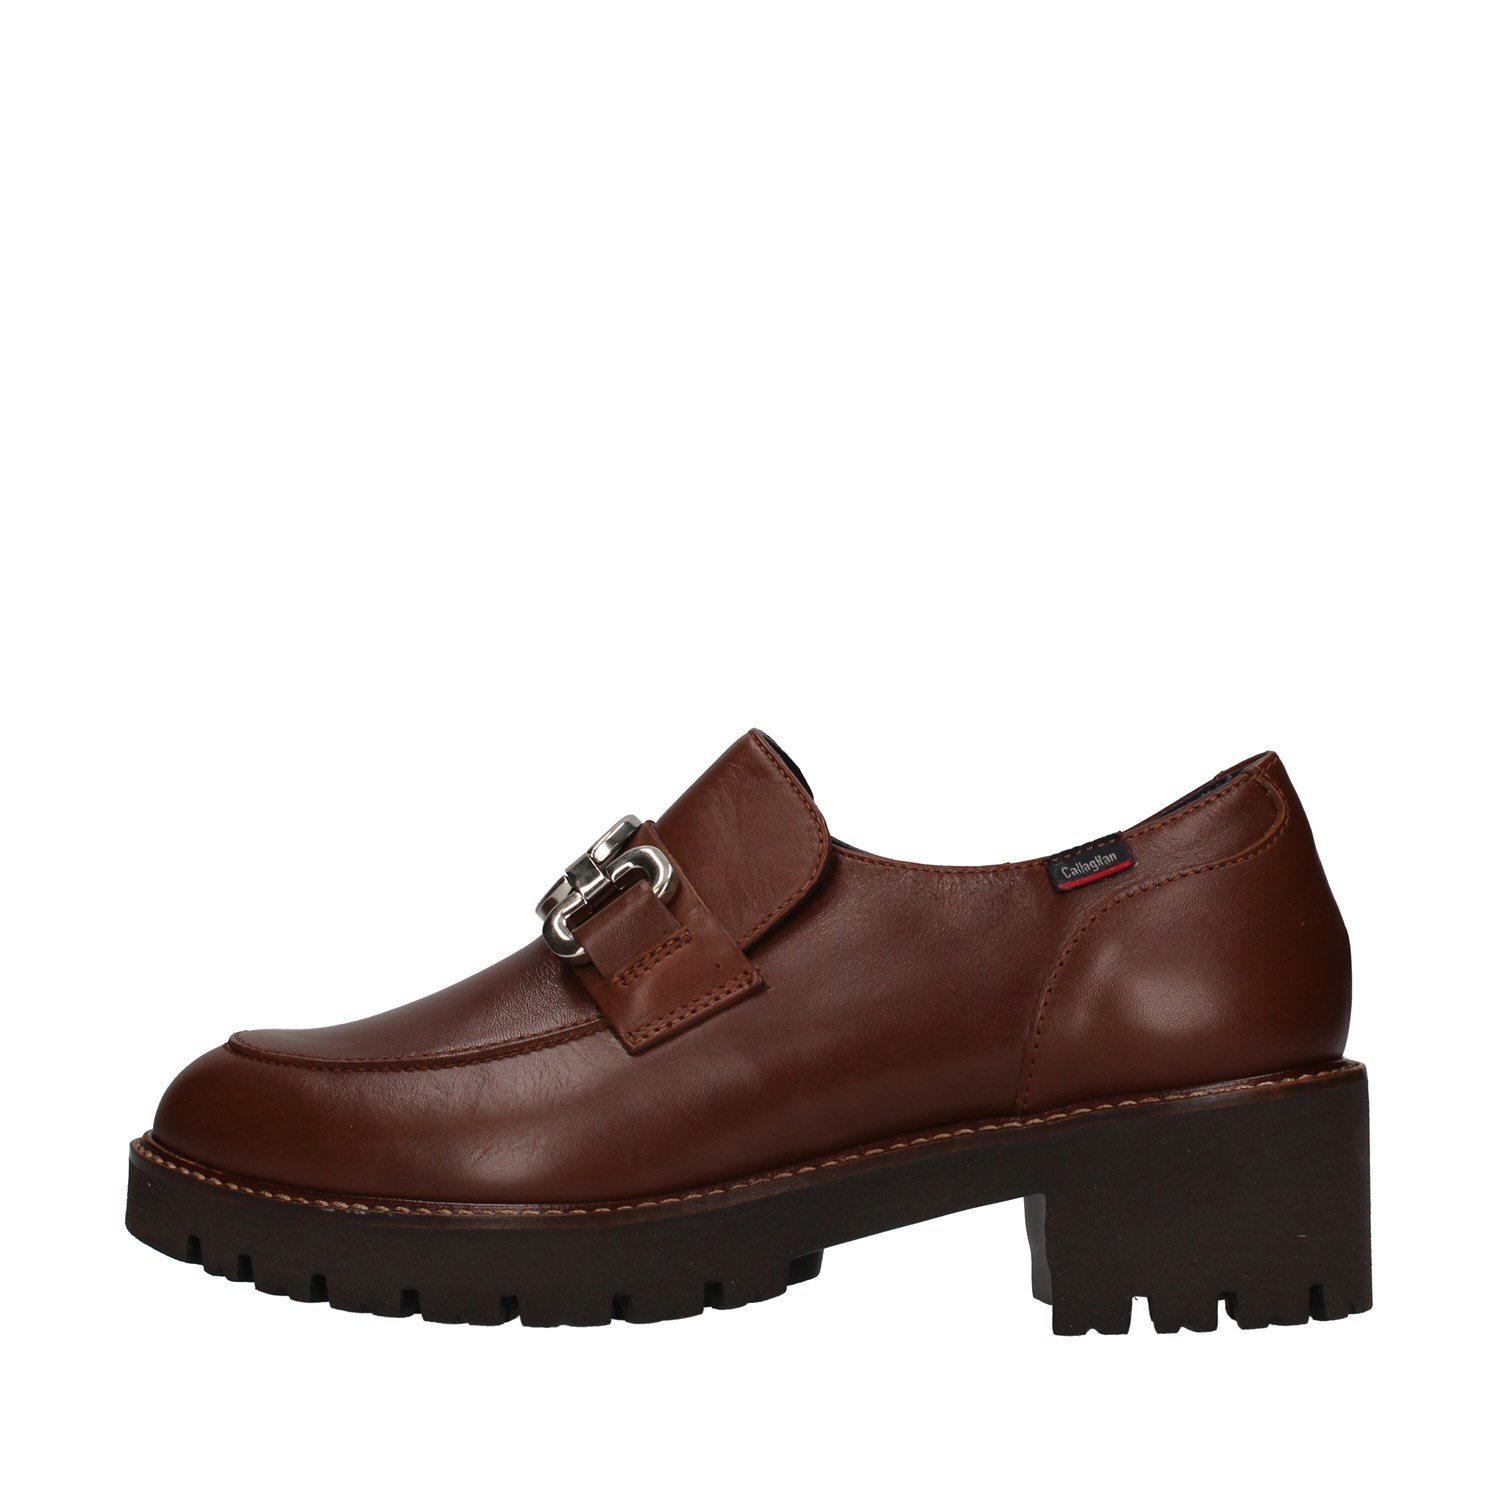 Callaghan Shoes Woman Loafers BROWN 13444